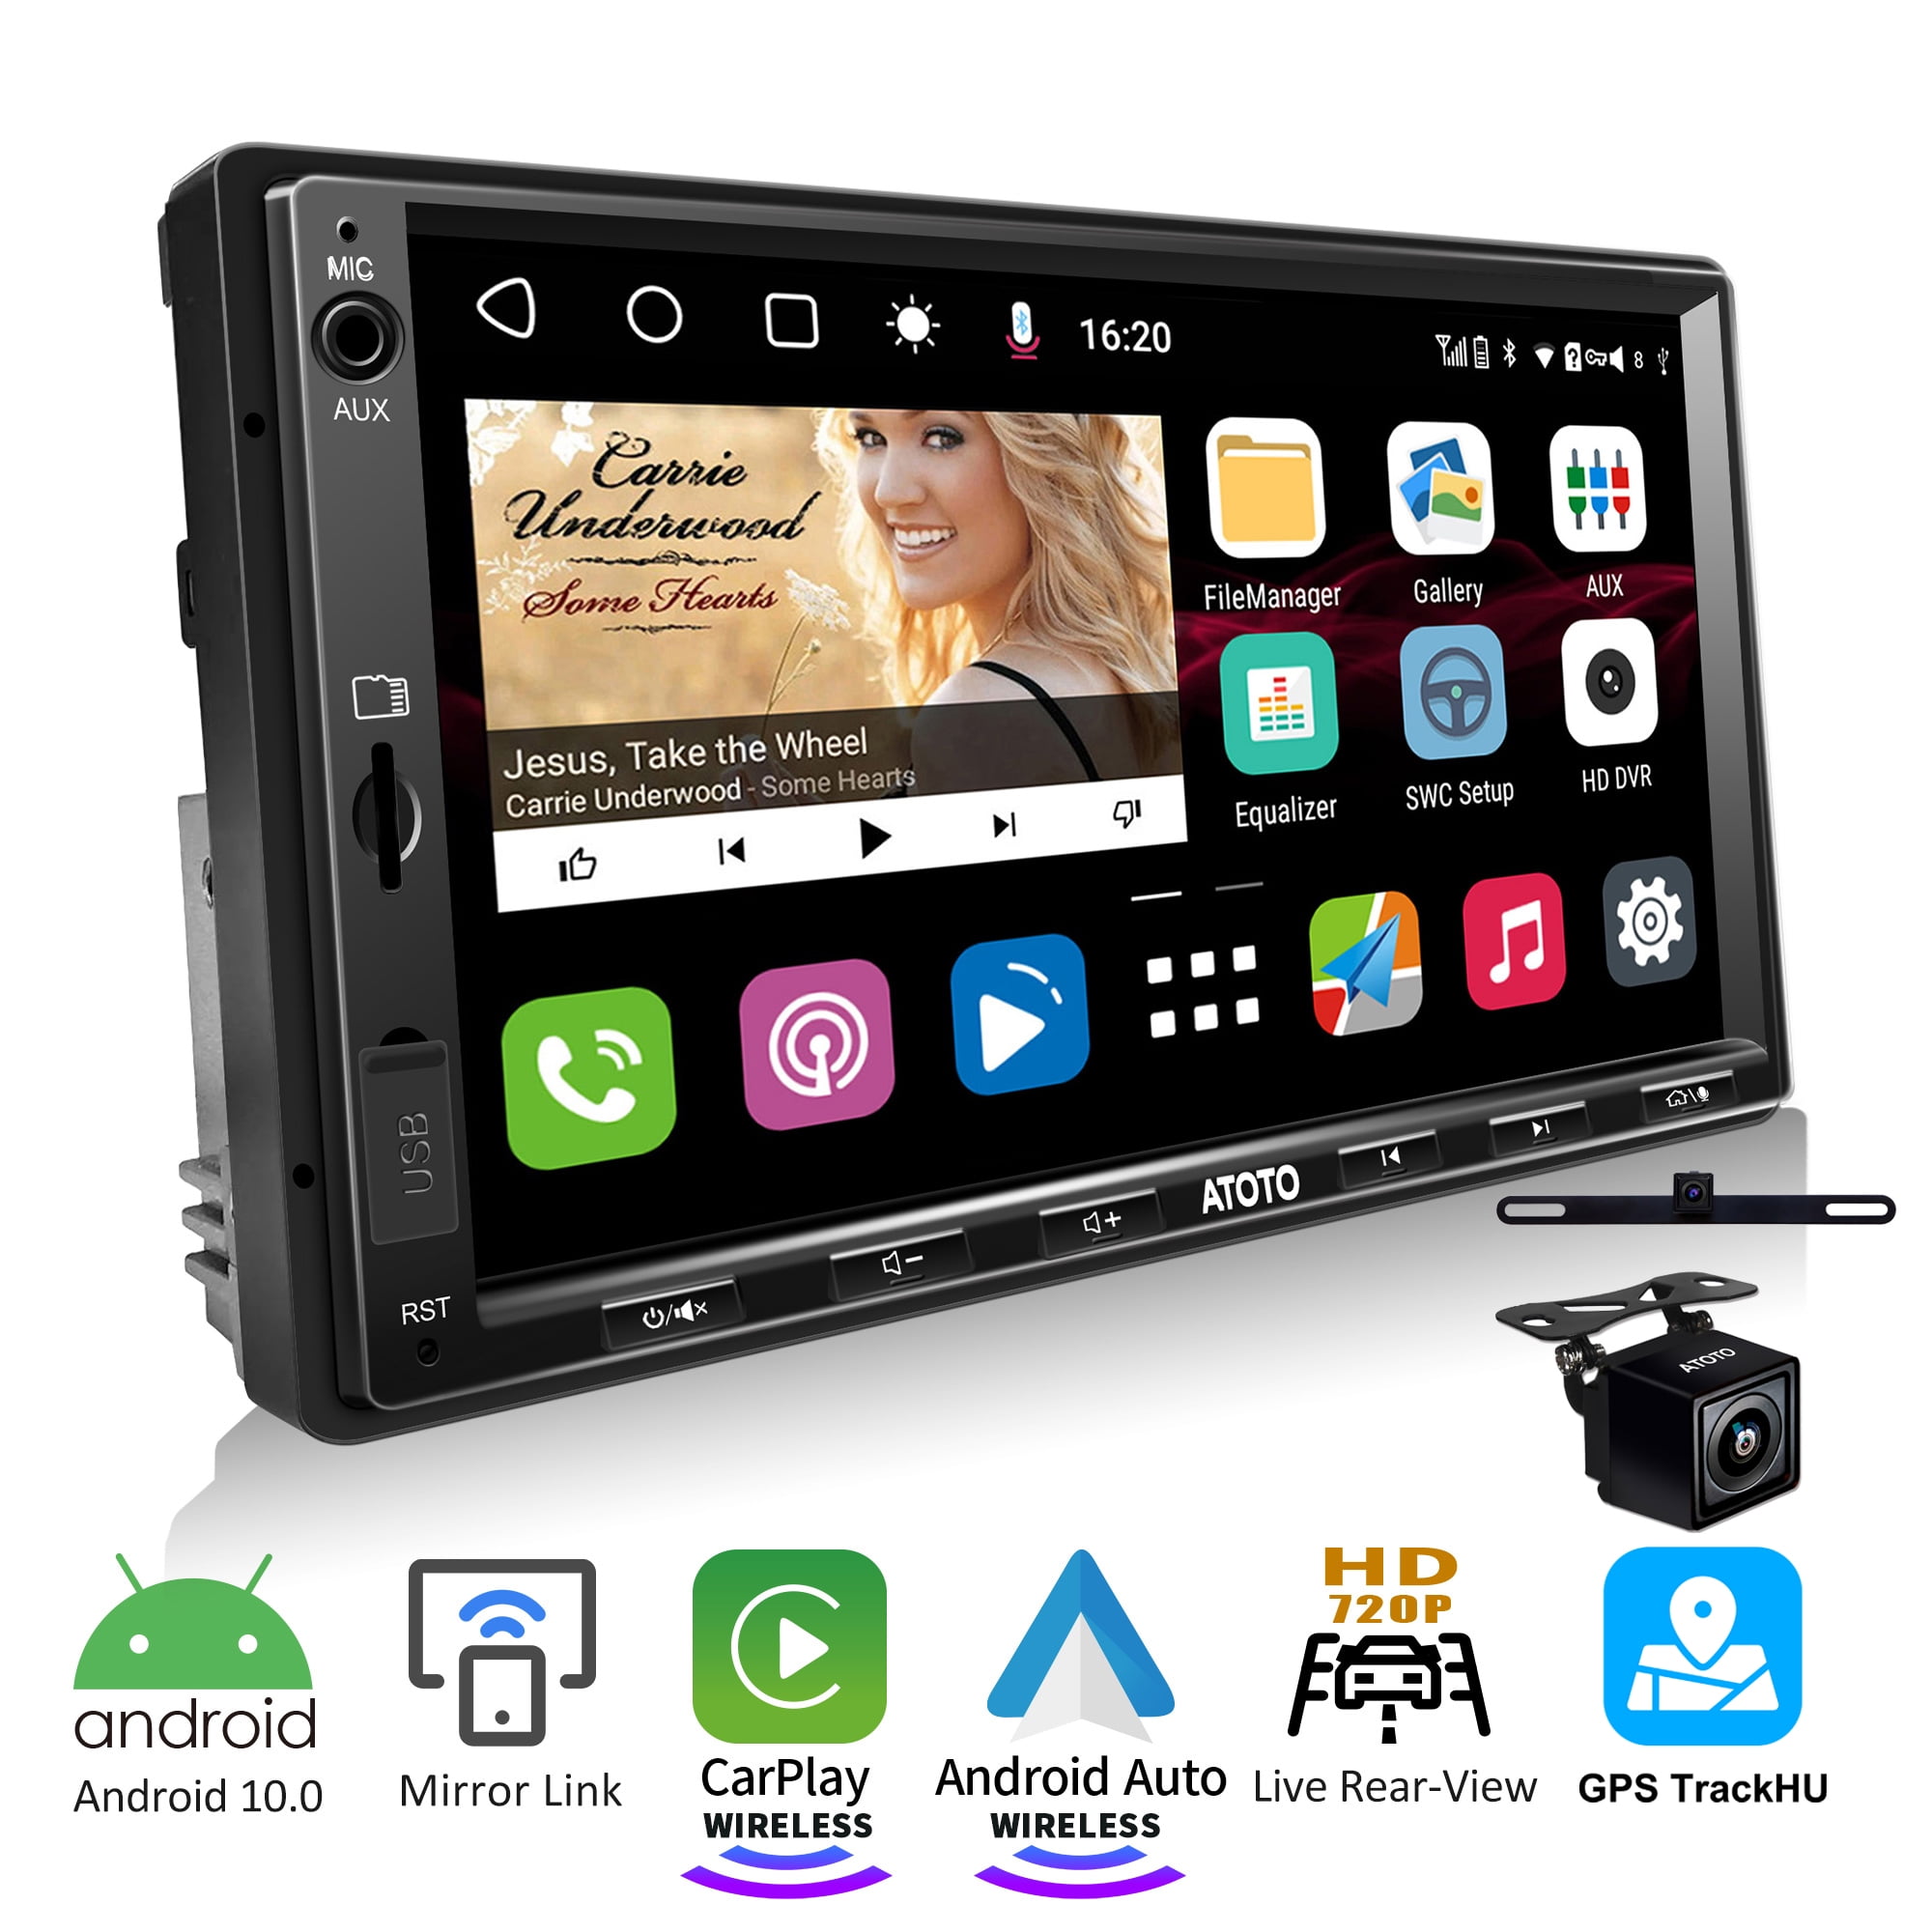 atoto s8 android10 6+128g car video